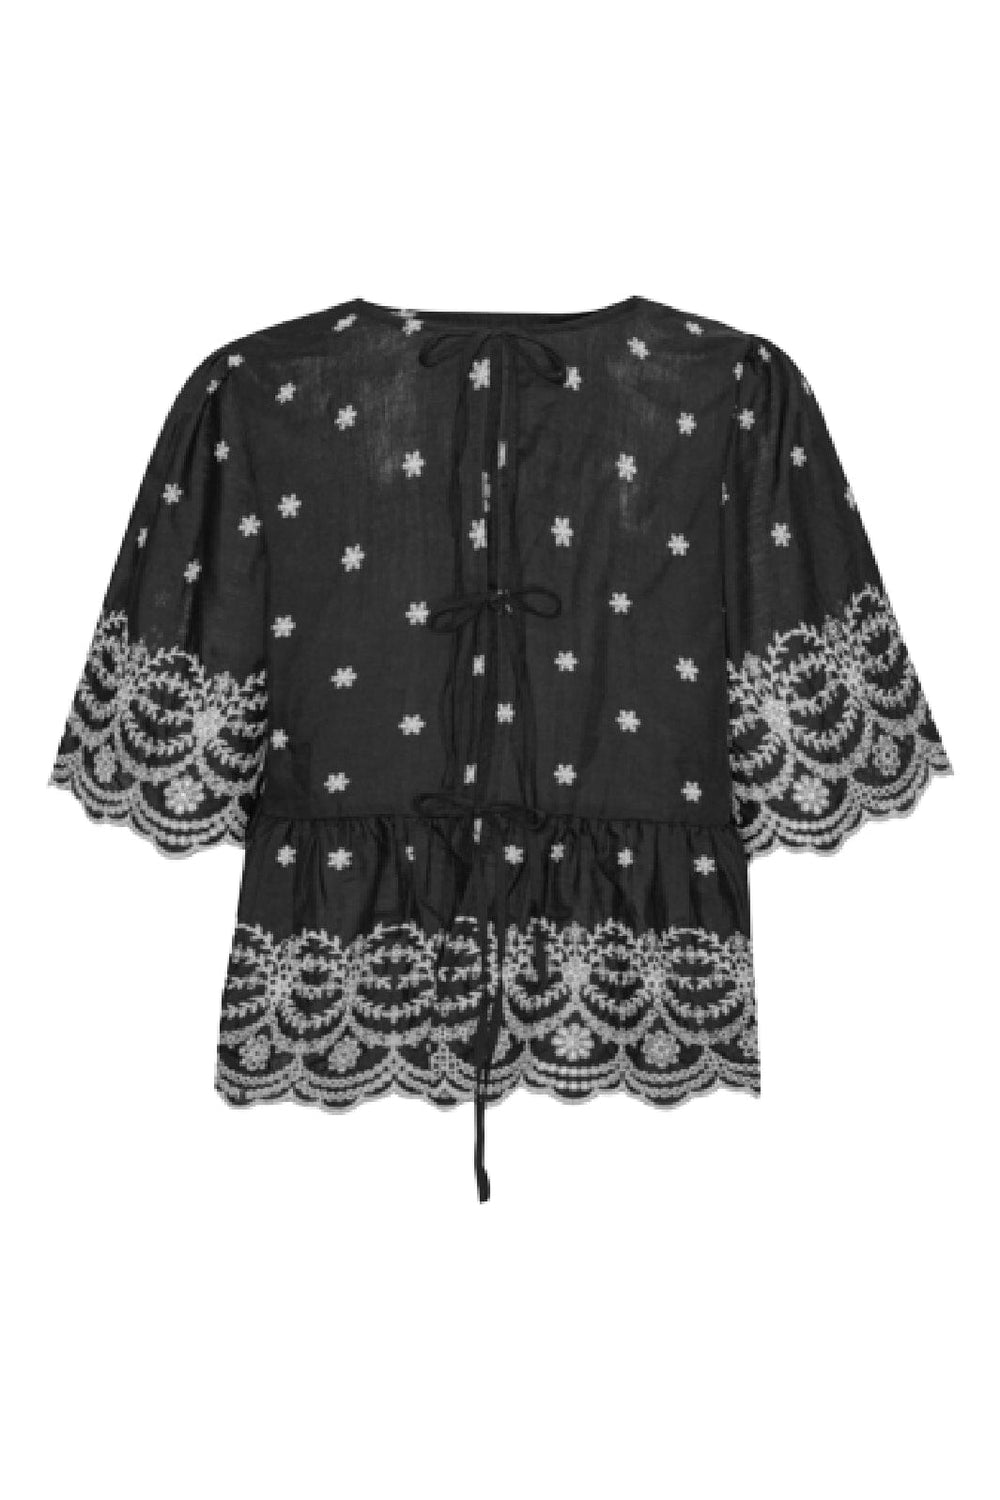 Forudbestilling - BYIC - Lula Top - bwe Black White Embroidery Toppe 